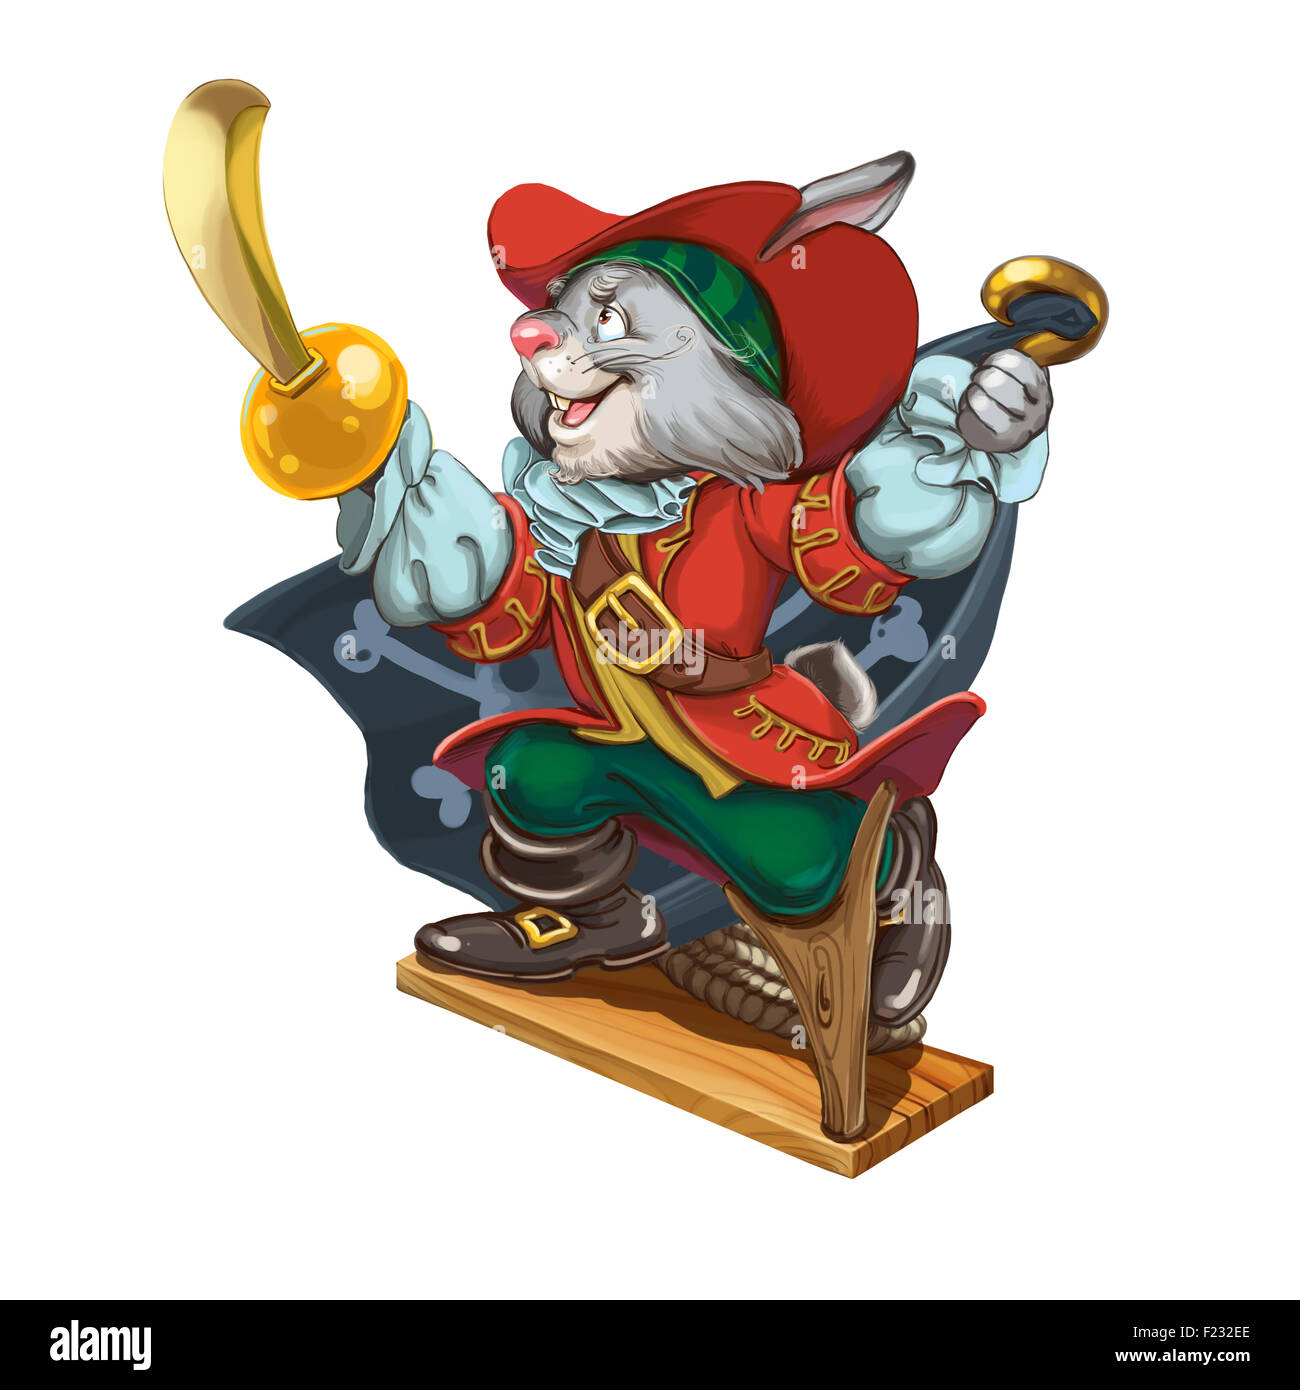 Cartoon hare pirate with a saber in one hand and a hook in another calls for adventures. Invitation card for a holiday or birthd Stock Photo